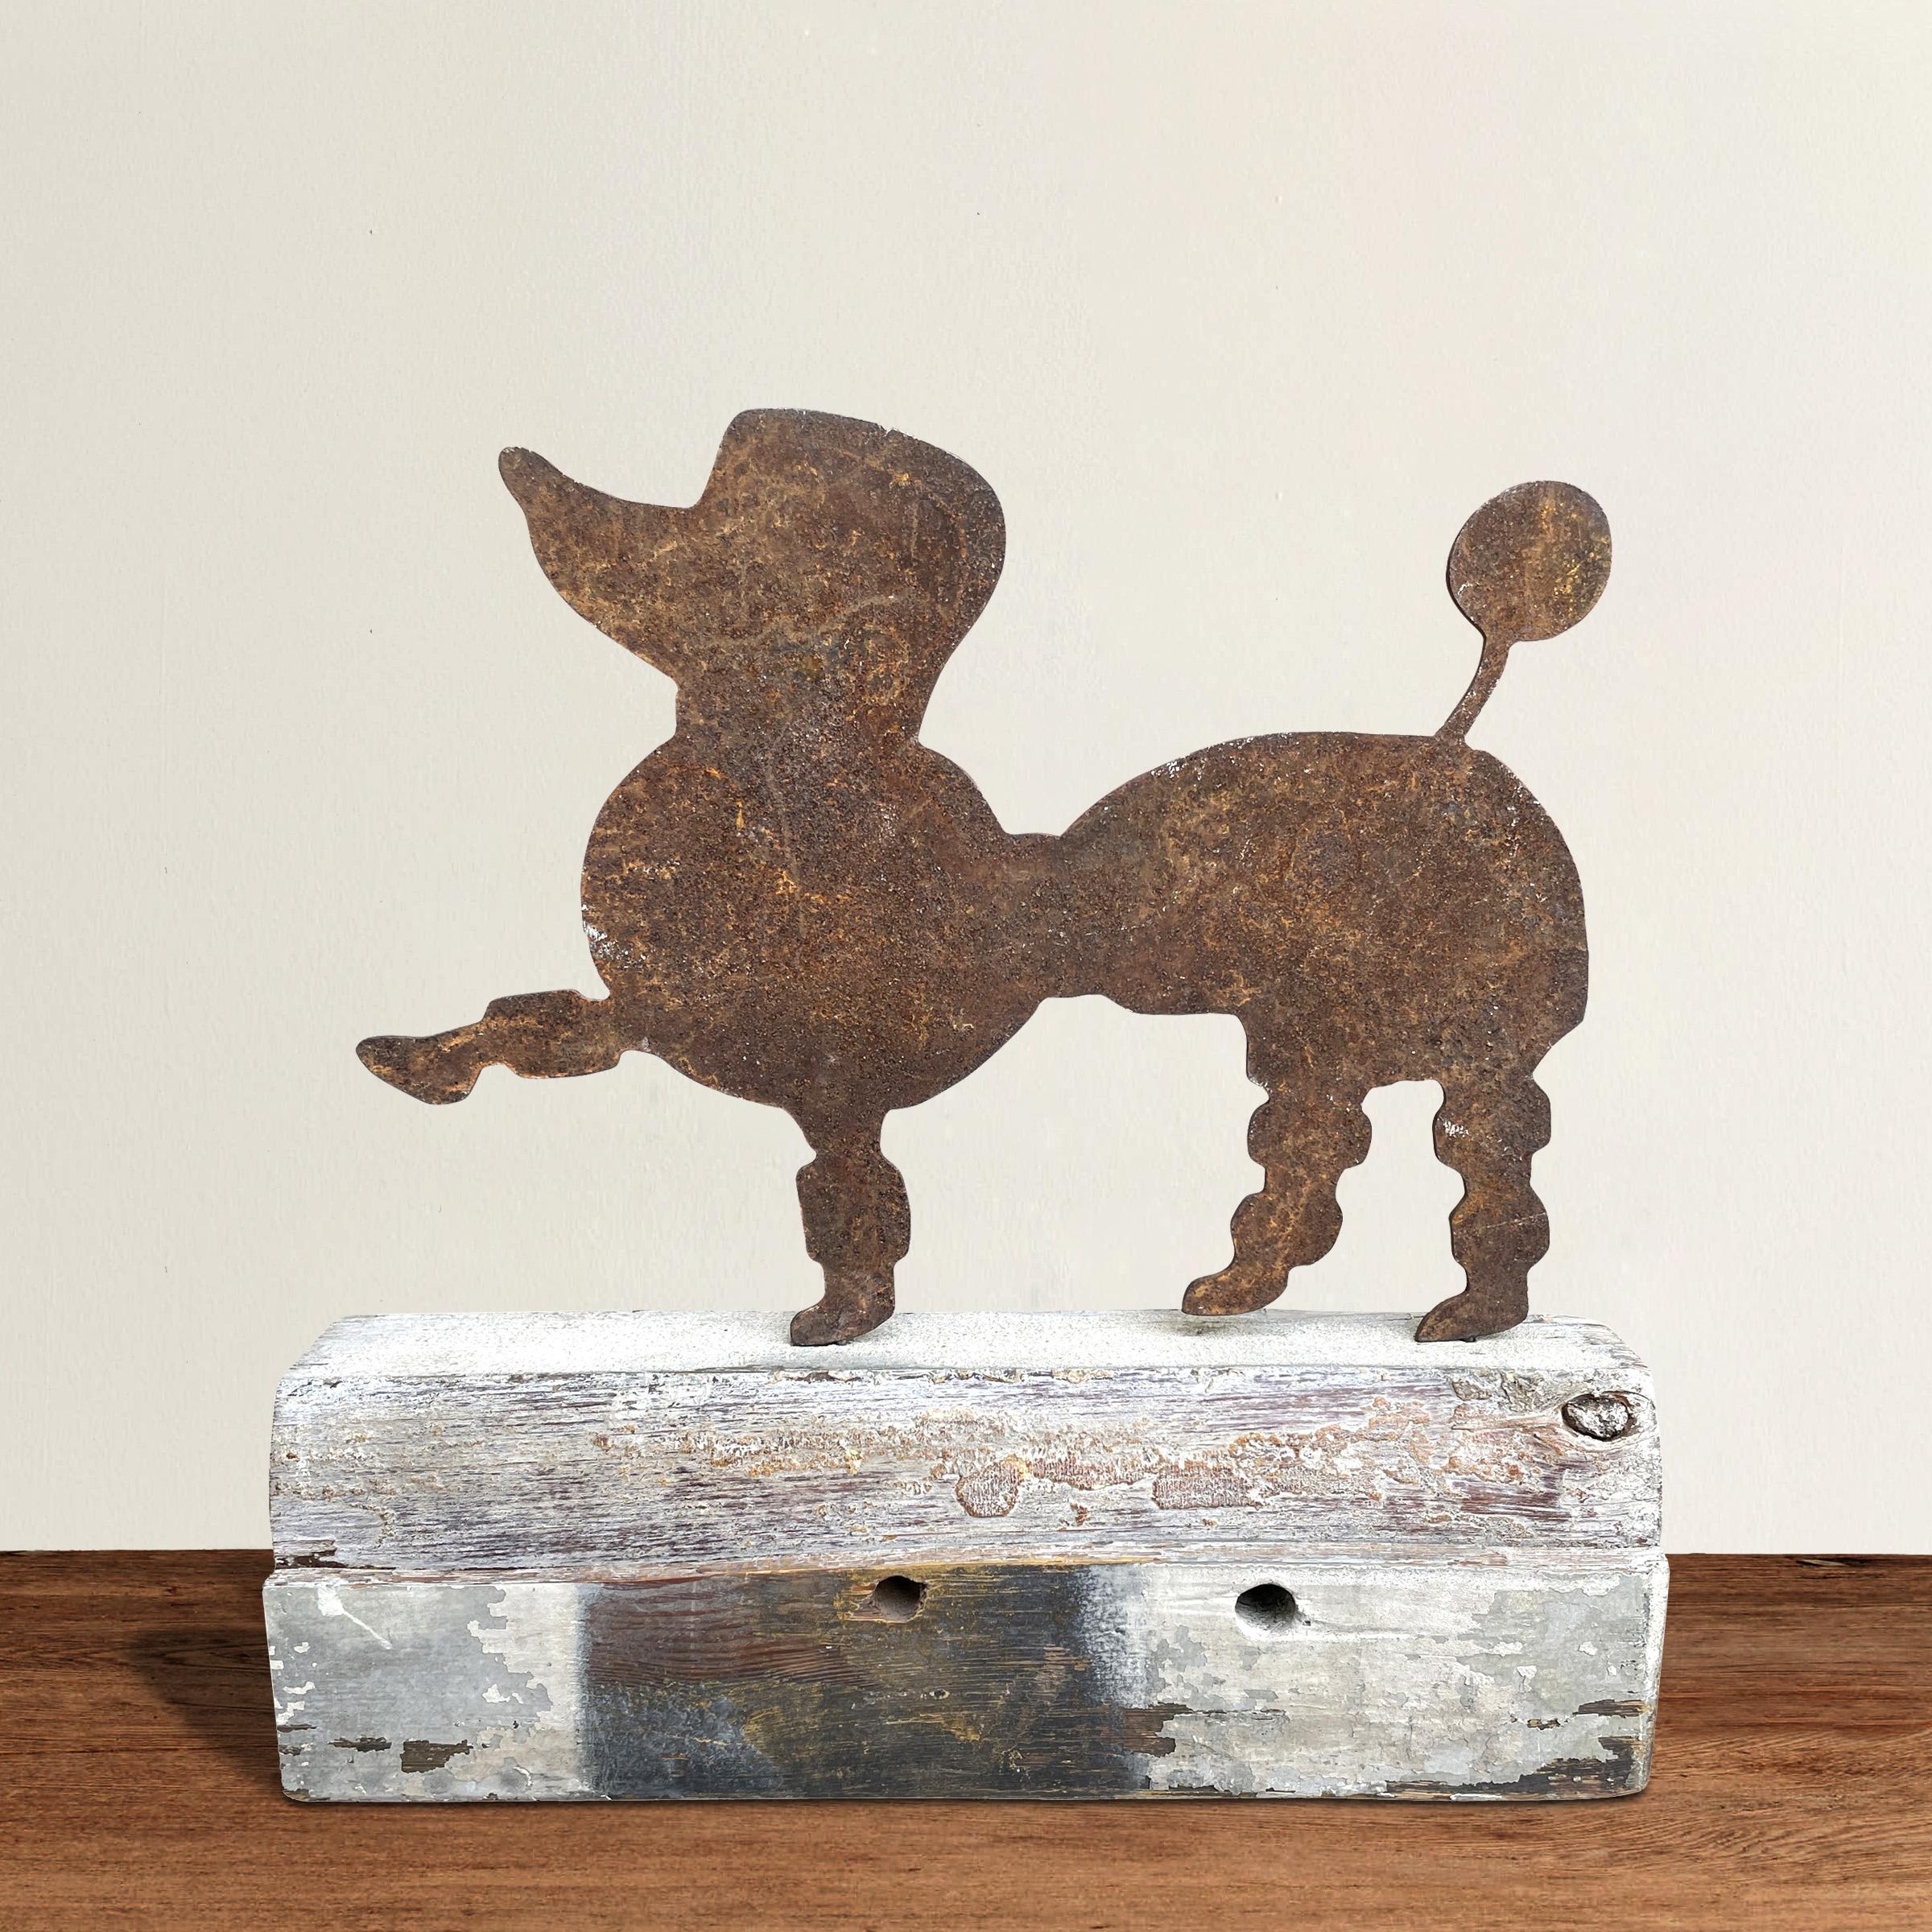 A charming 20th century American Folk Art poodle sculpture constructed from a cut iron poodle silhouette mounted to an architectural painted wood remnant.